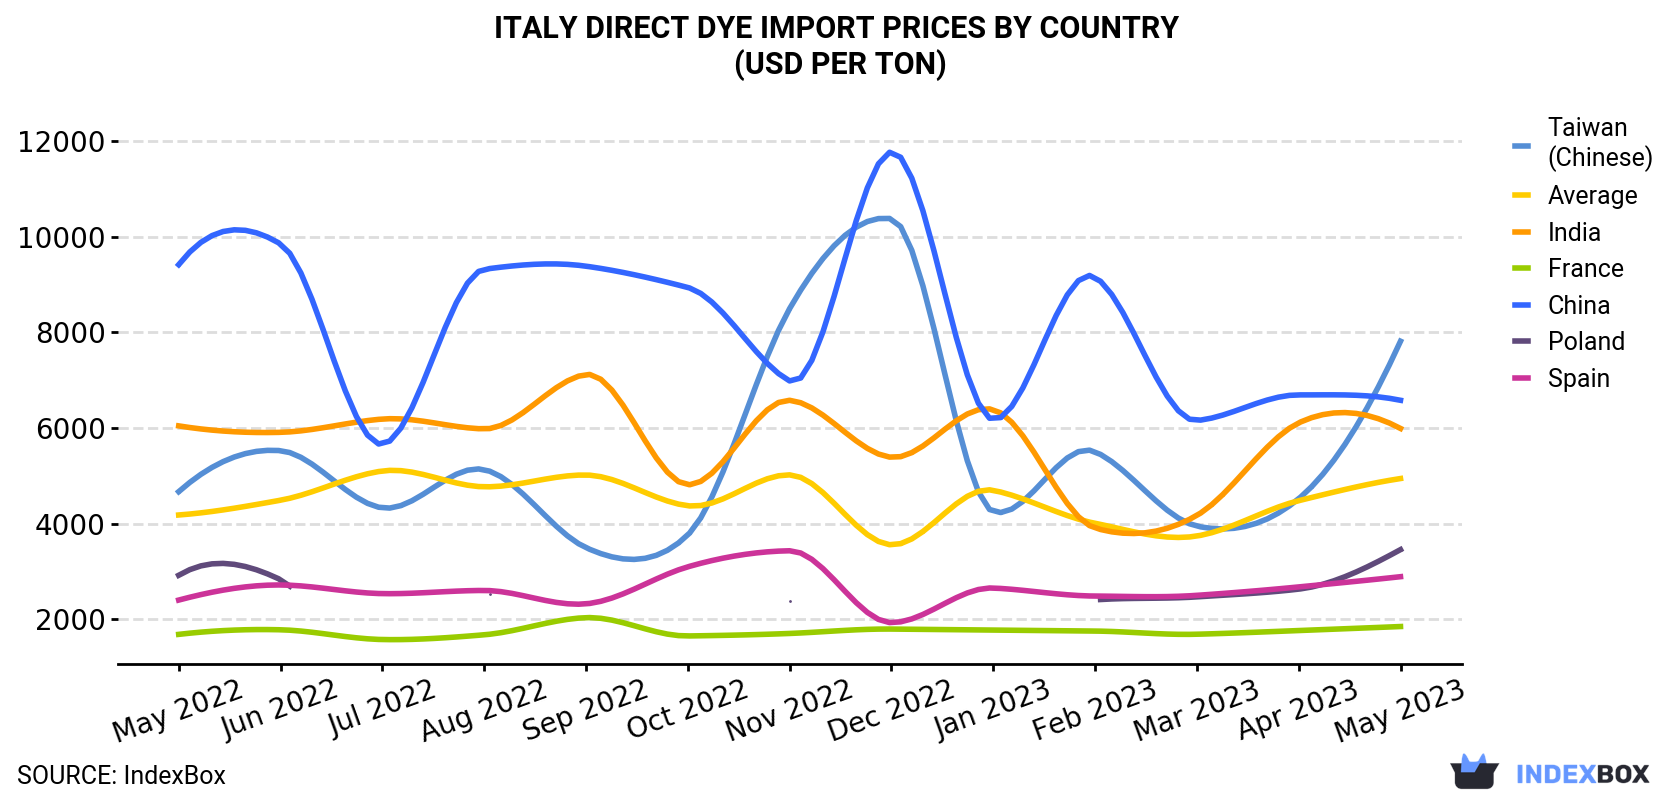 Italy Direct Dye Import Prices By Country (USD Per Ton)